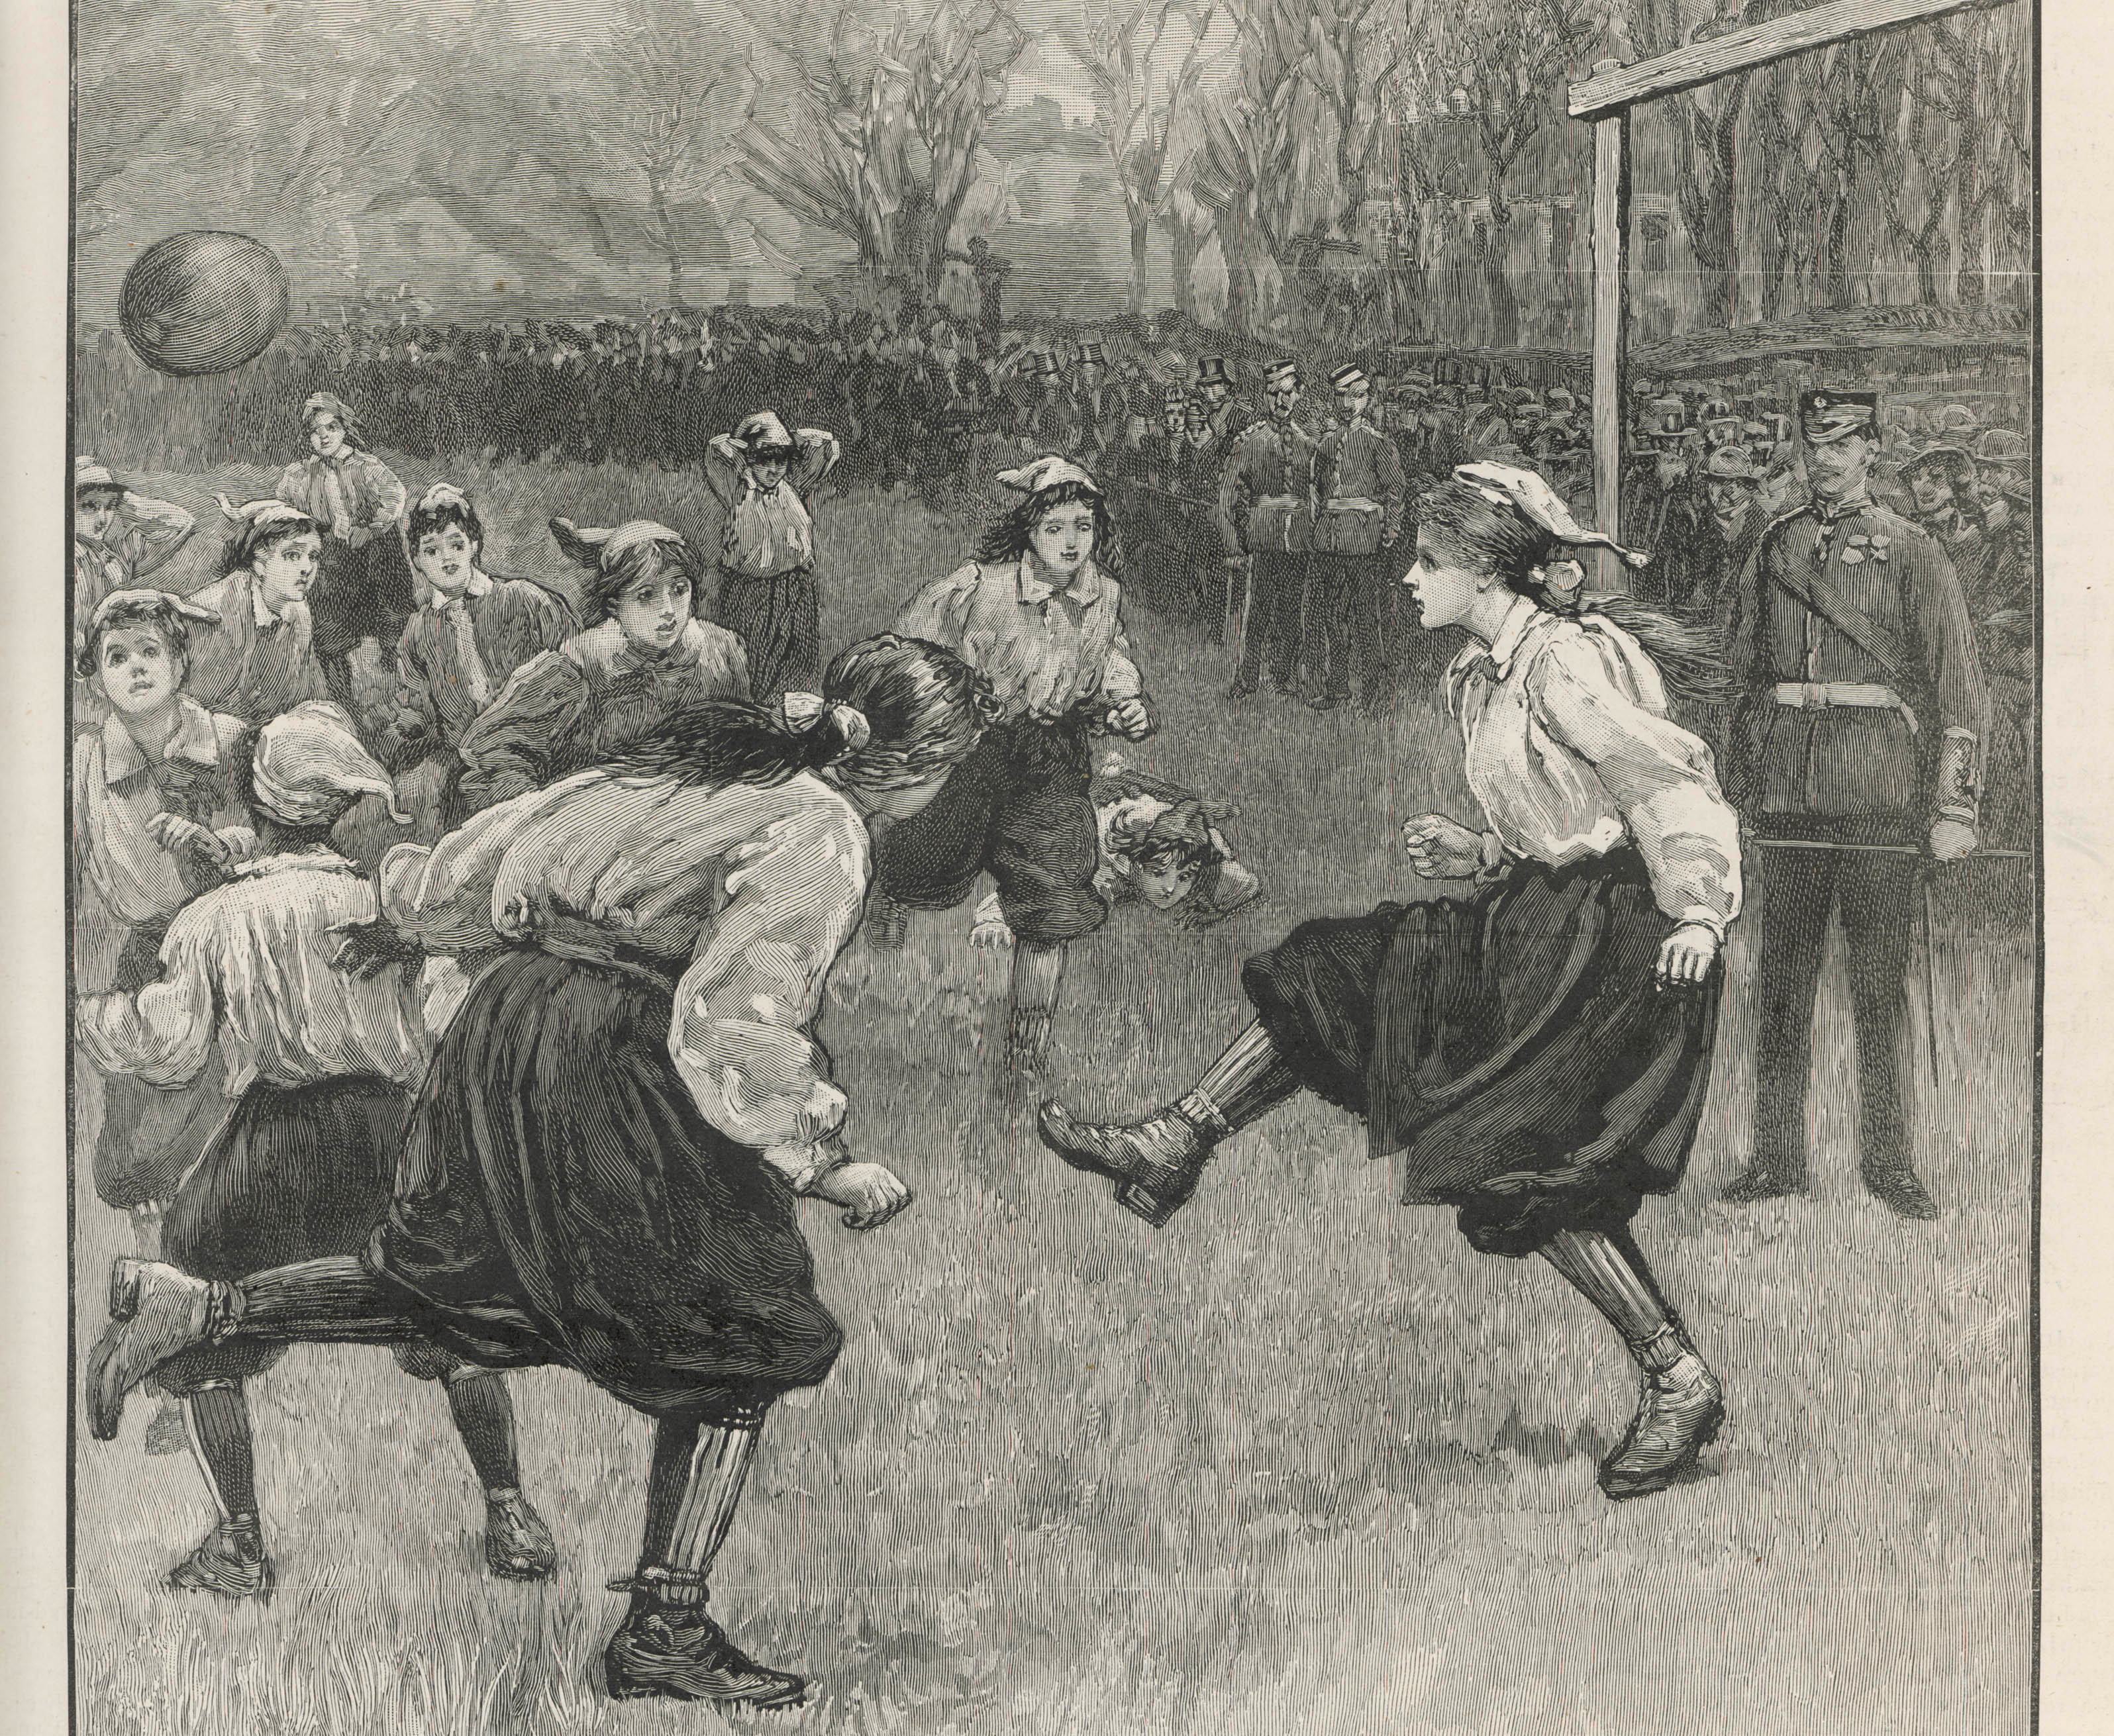 The first match of the British  Ladies' Football Club         Date: 1895